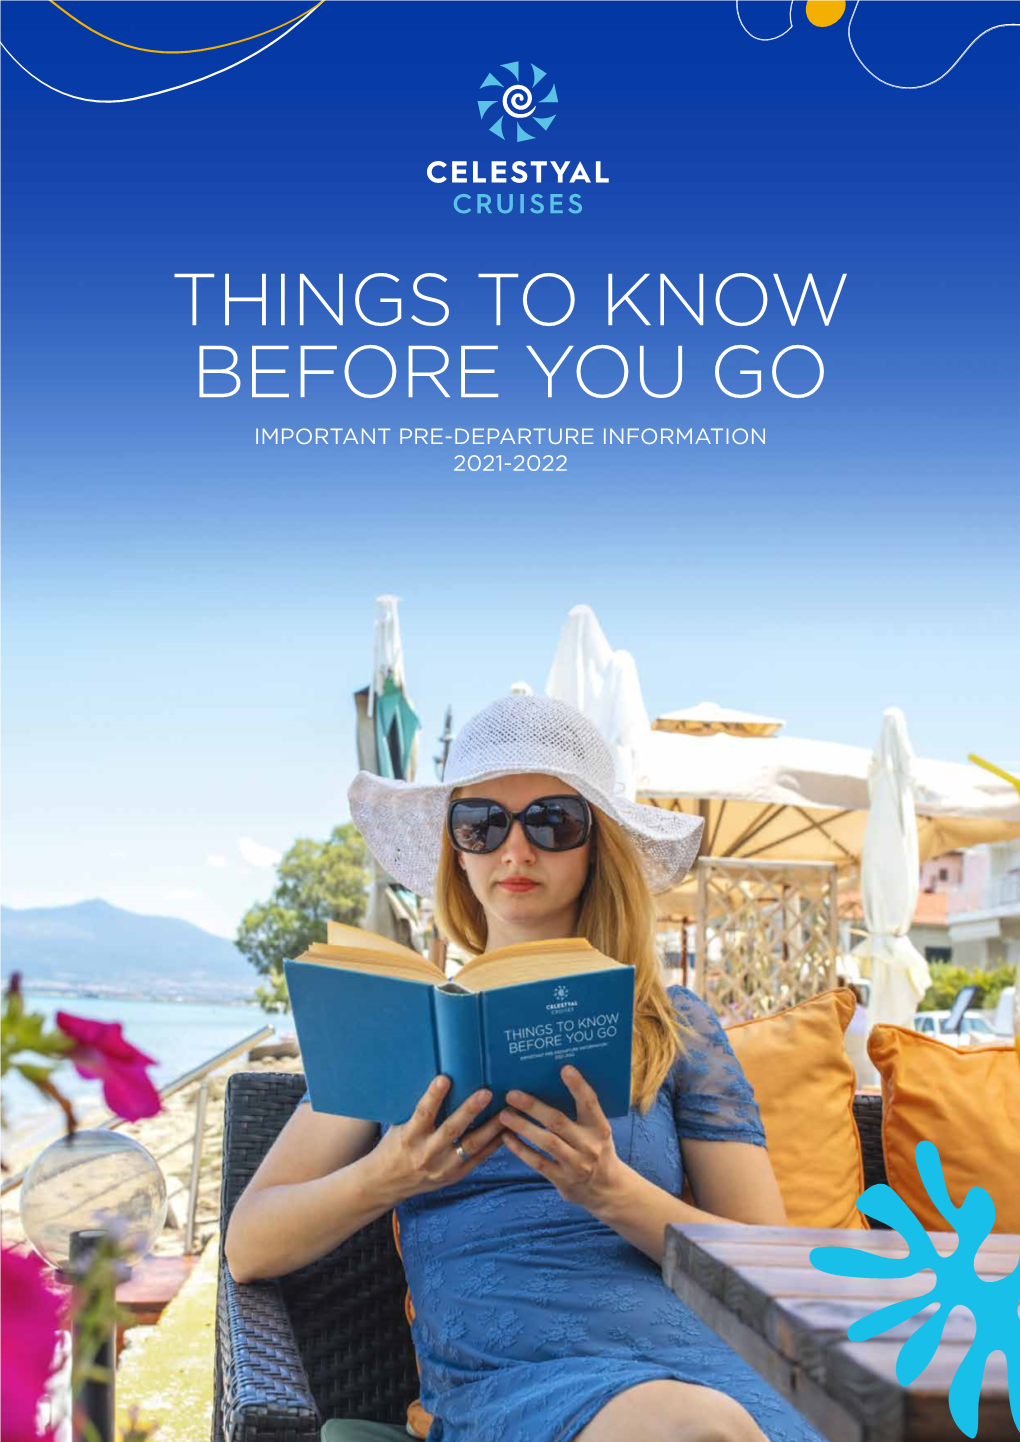 THINGS to KNOW BEFORE YOU GO IMPORTANT PRE-DEPARTURE INFORMATION 2021-2022 Contents